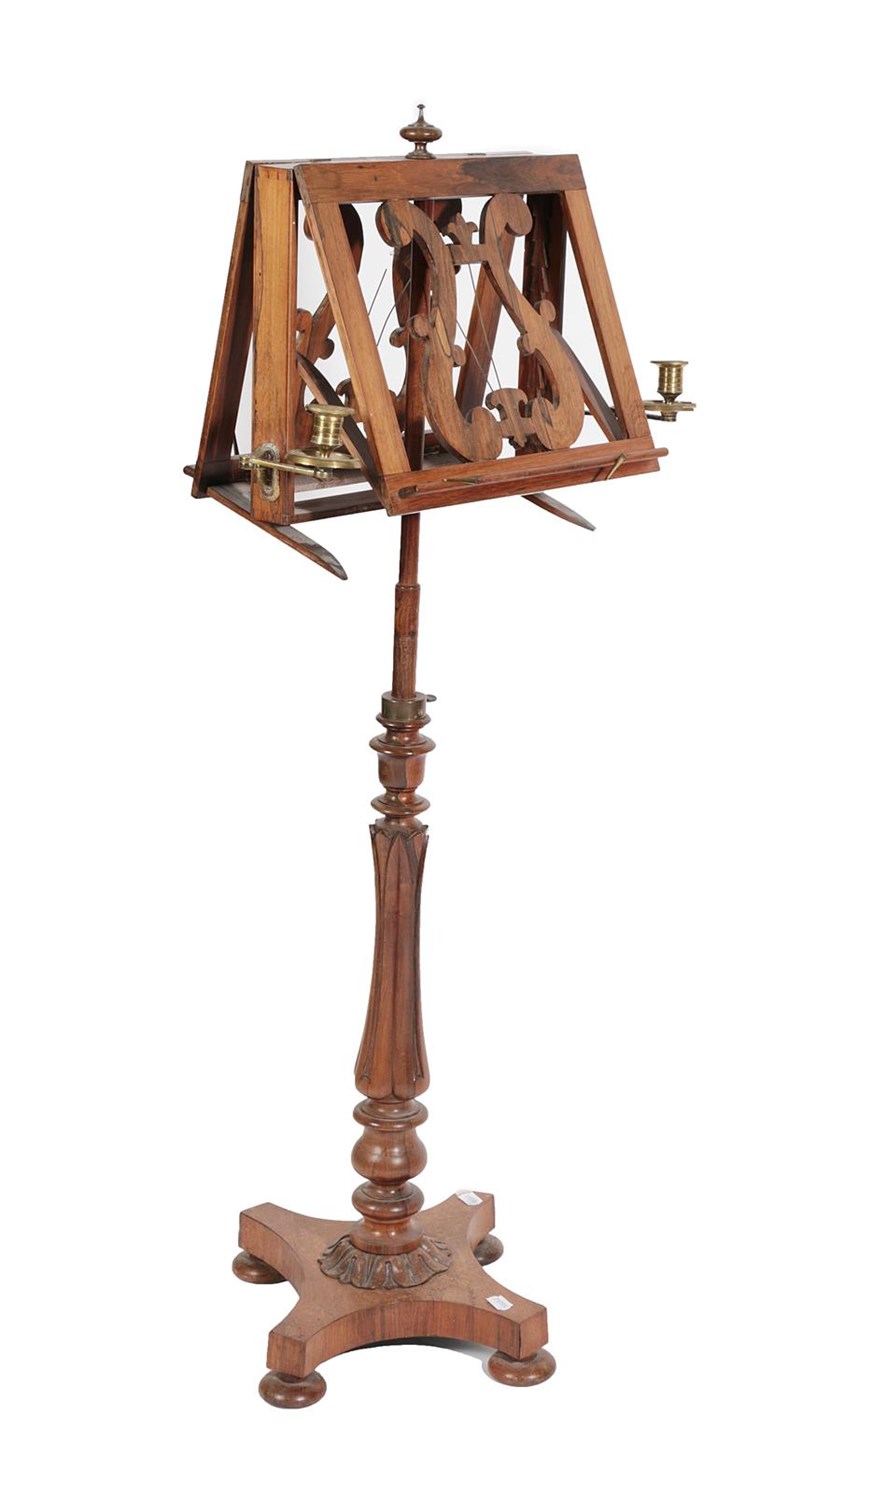 Lot 476 - An Early Victorian Rosewood Duet Stand, mid 19th century, with lyre shaped supports on an...